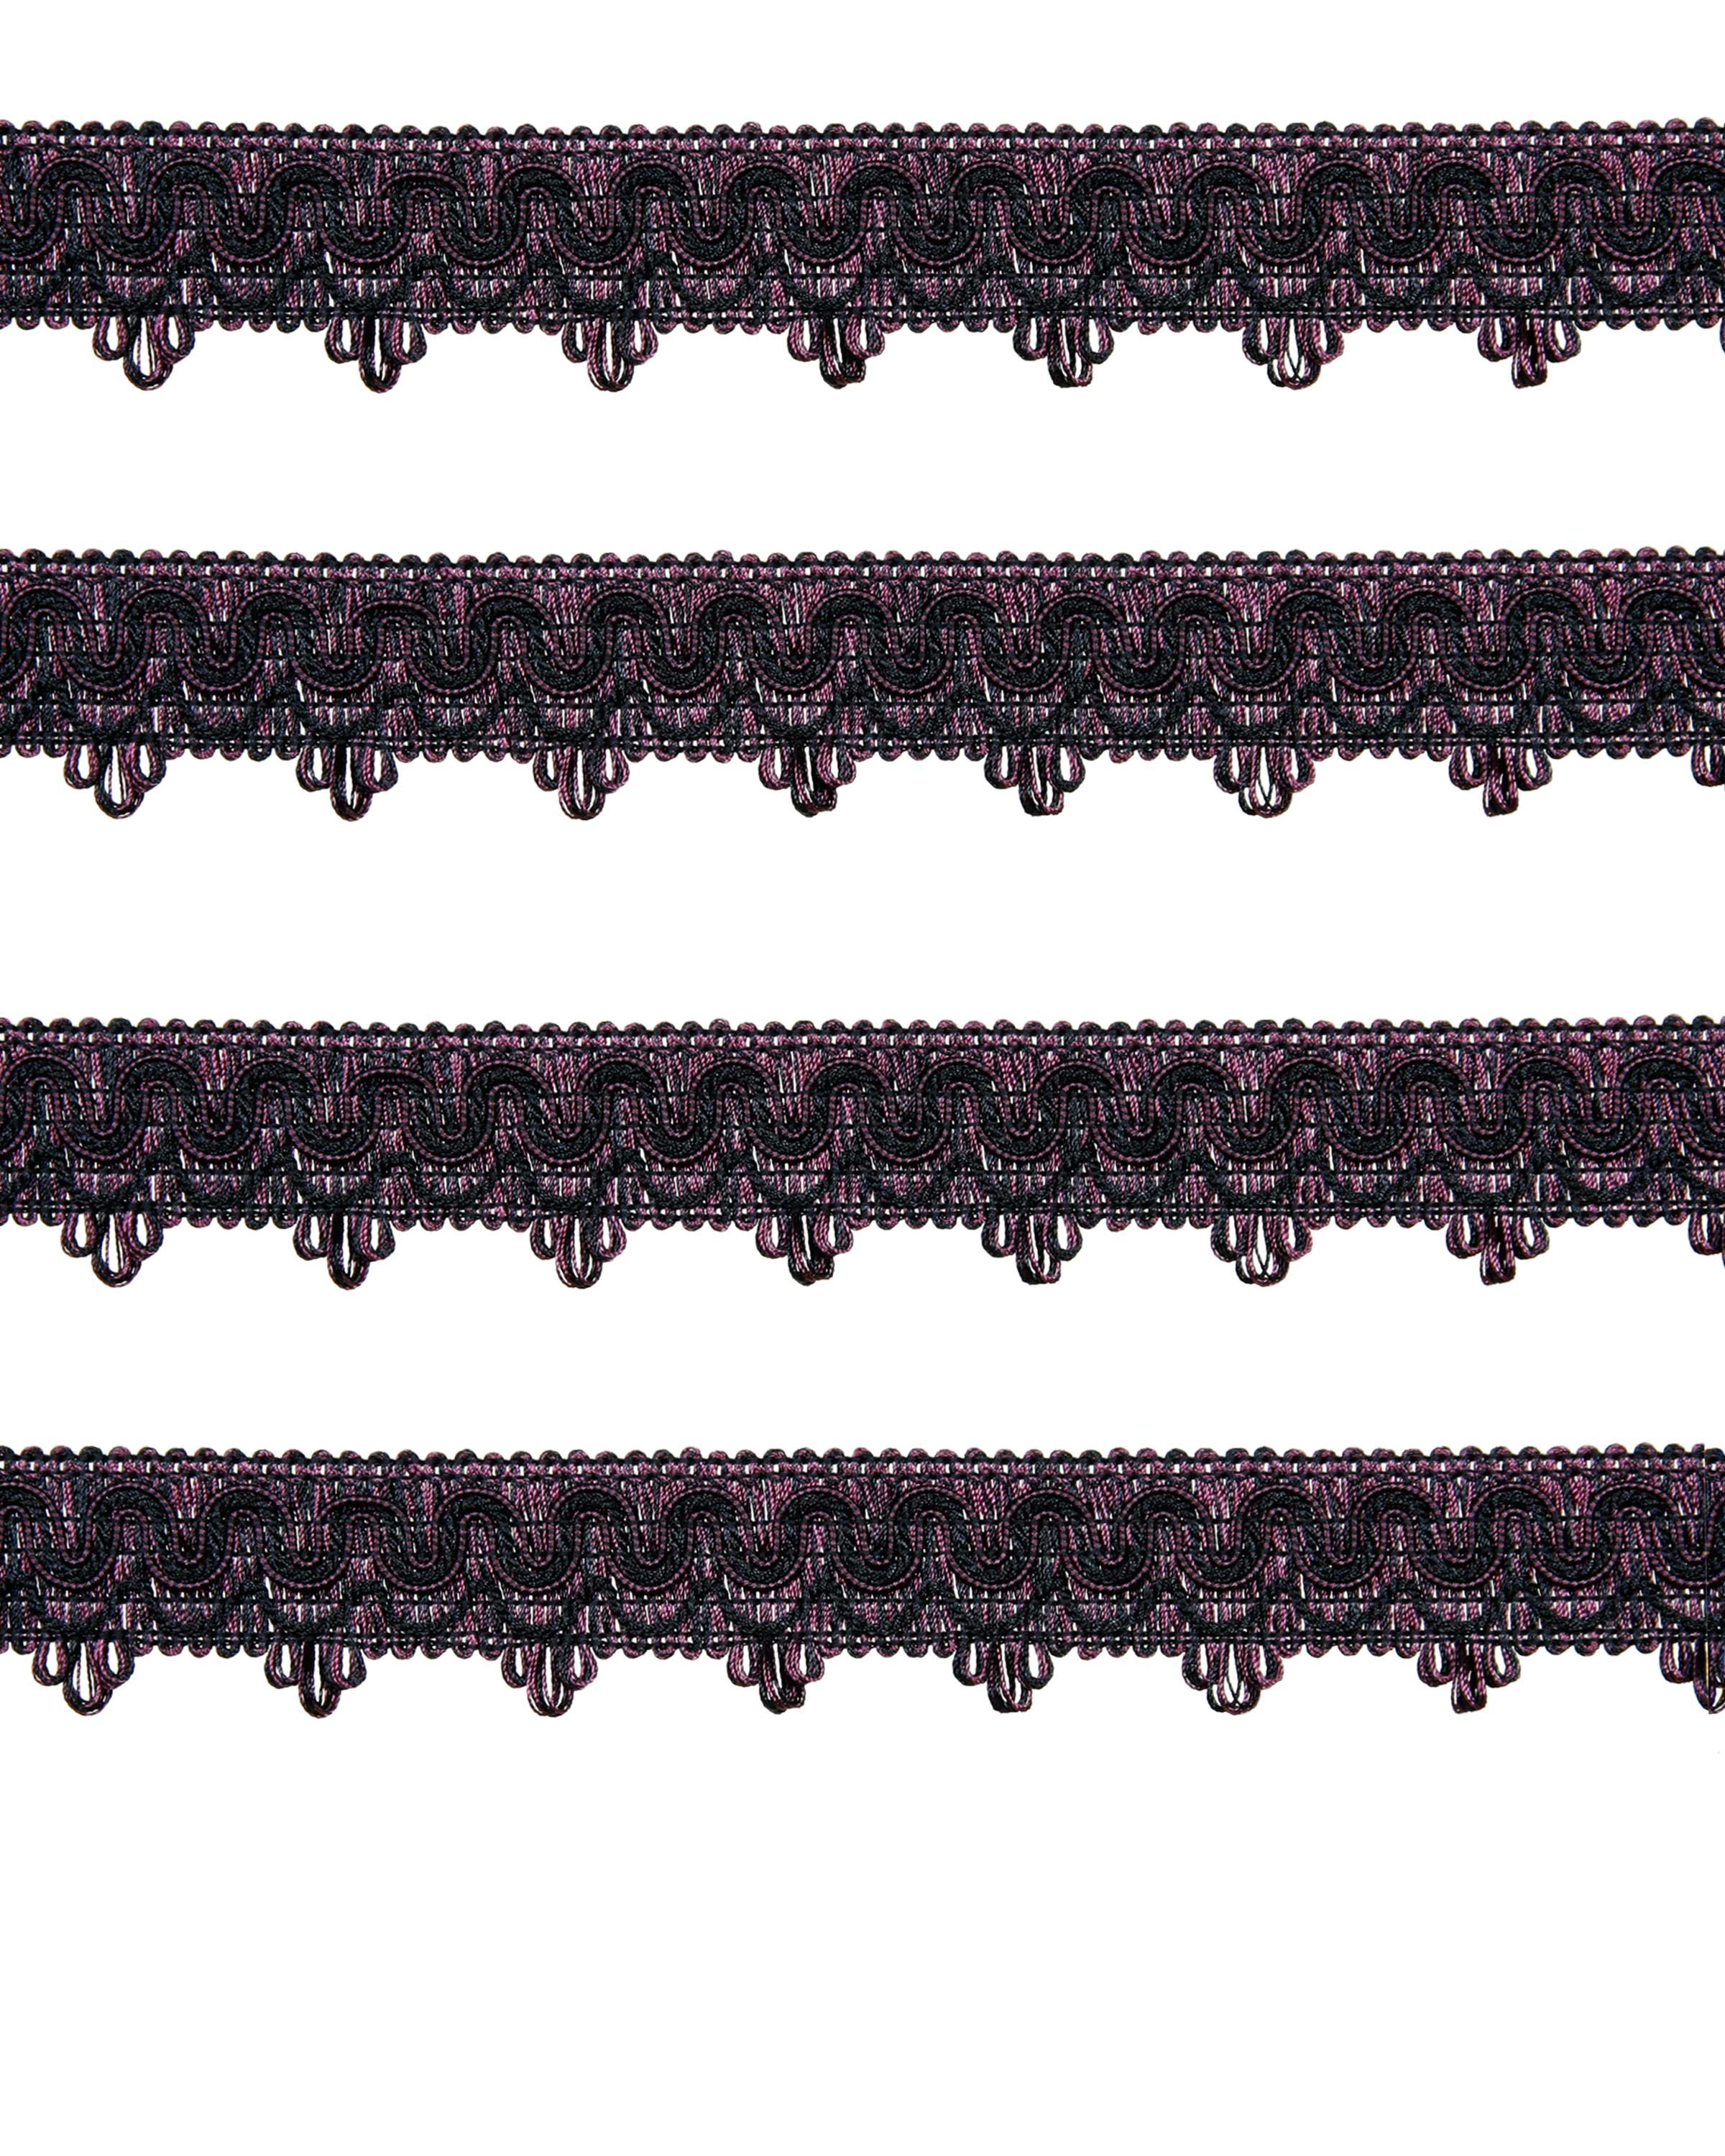 Ornate Scalloped Braid - Red Wine / Black 45mm Price is for 5 metres